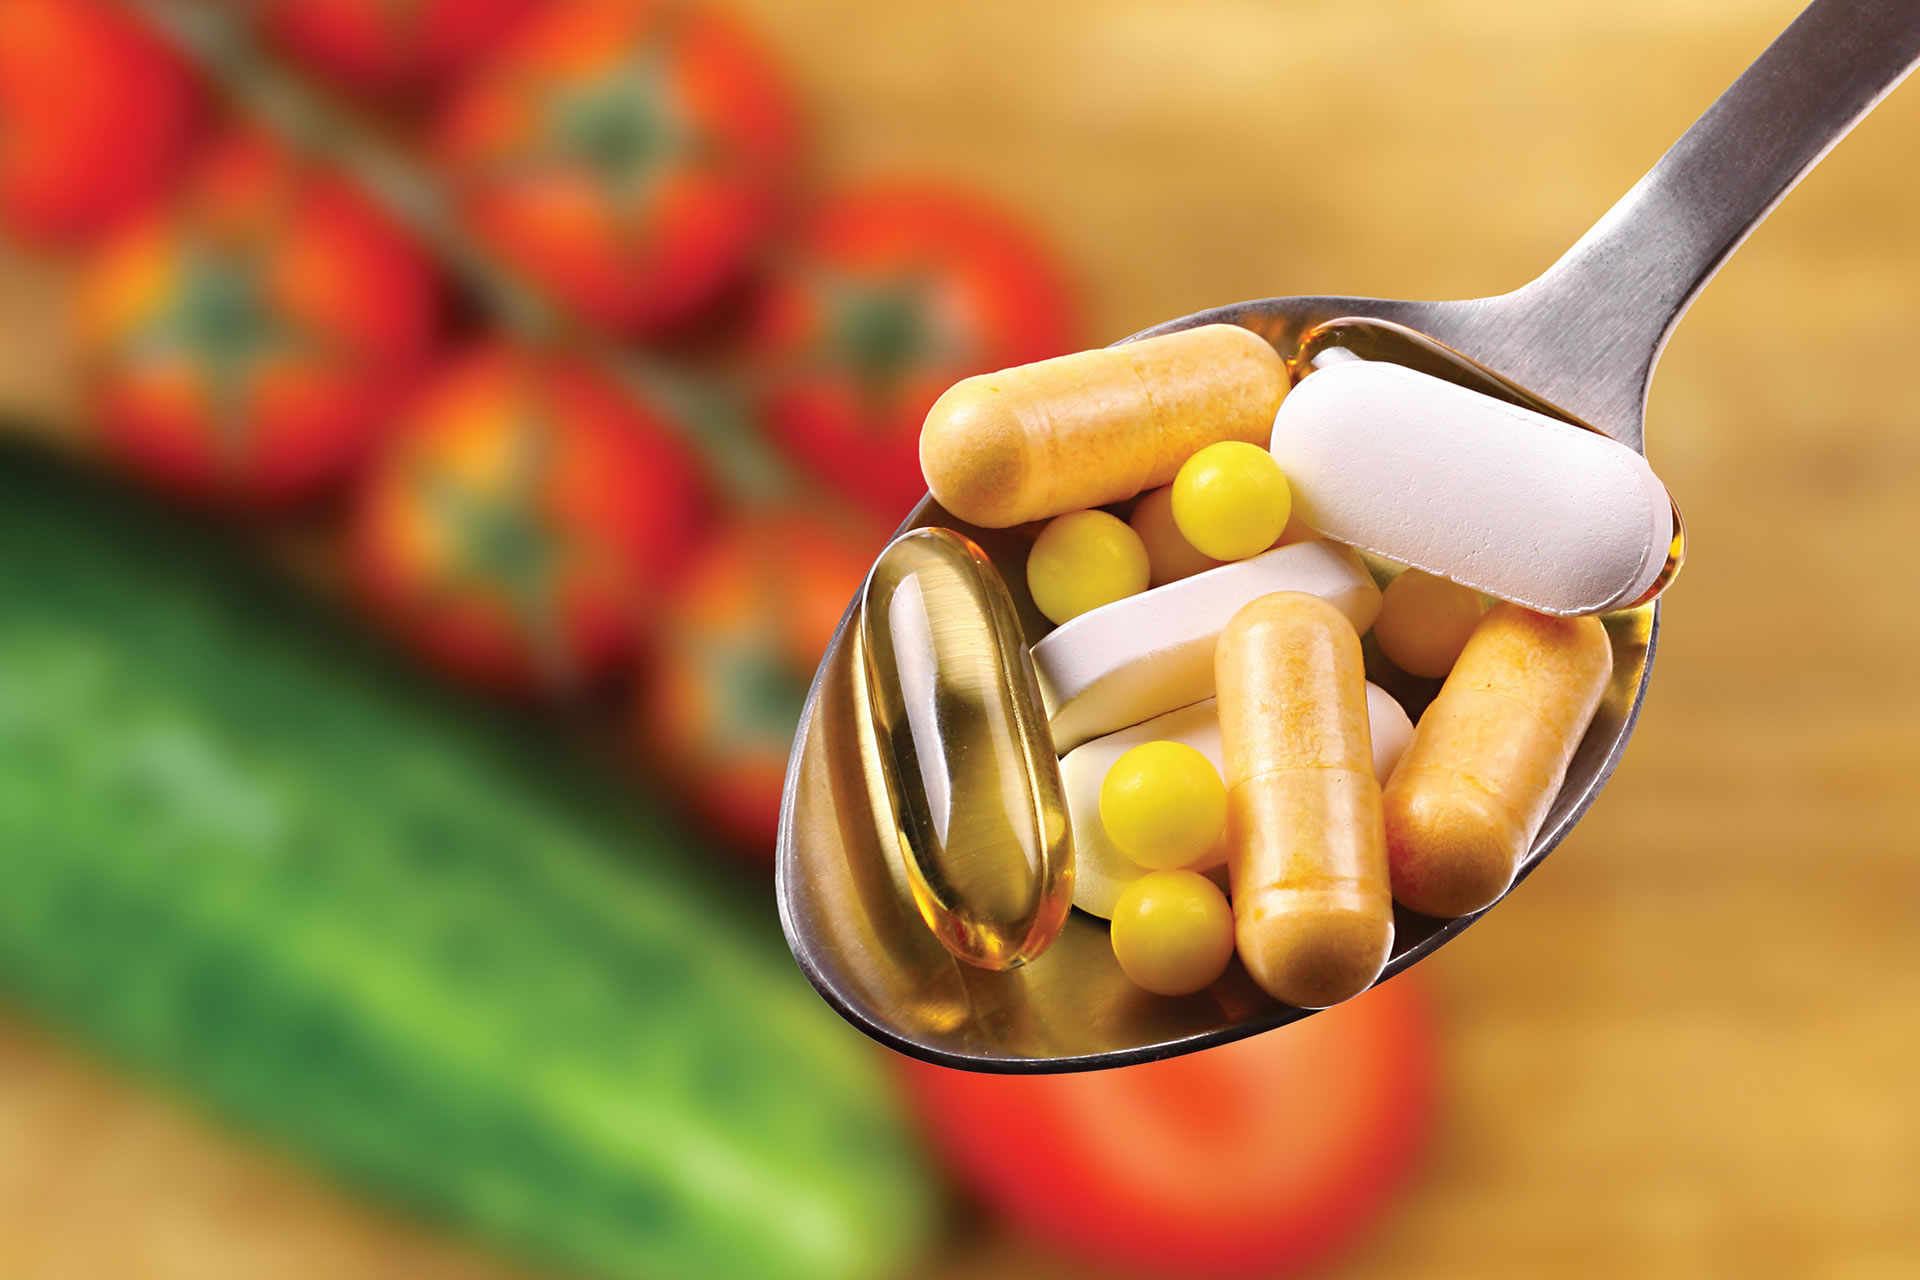 Food supplements and benefits associated with them